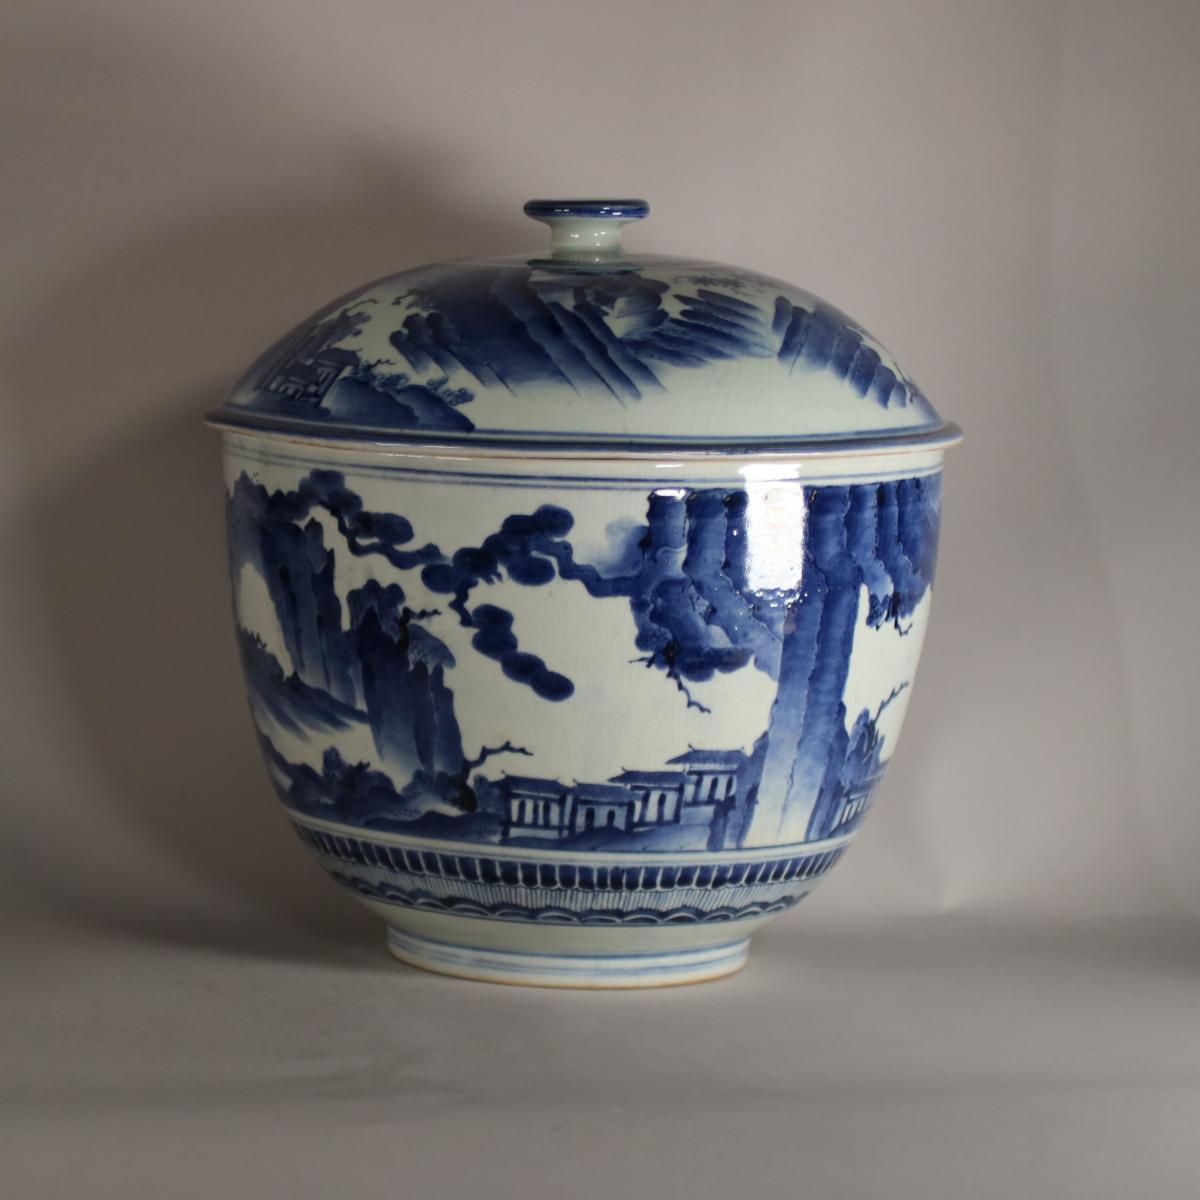 Further image of side of Arita tureen with continuous landscape decoration